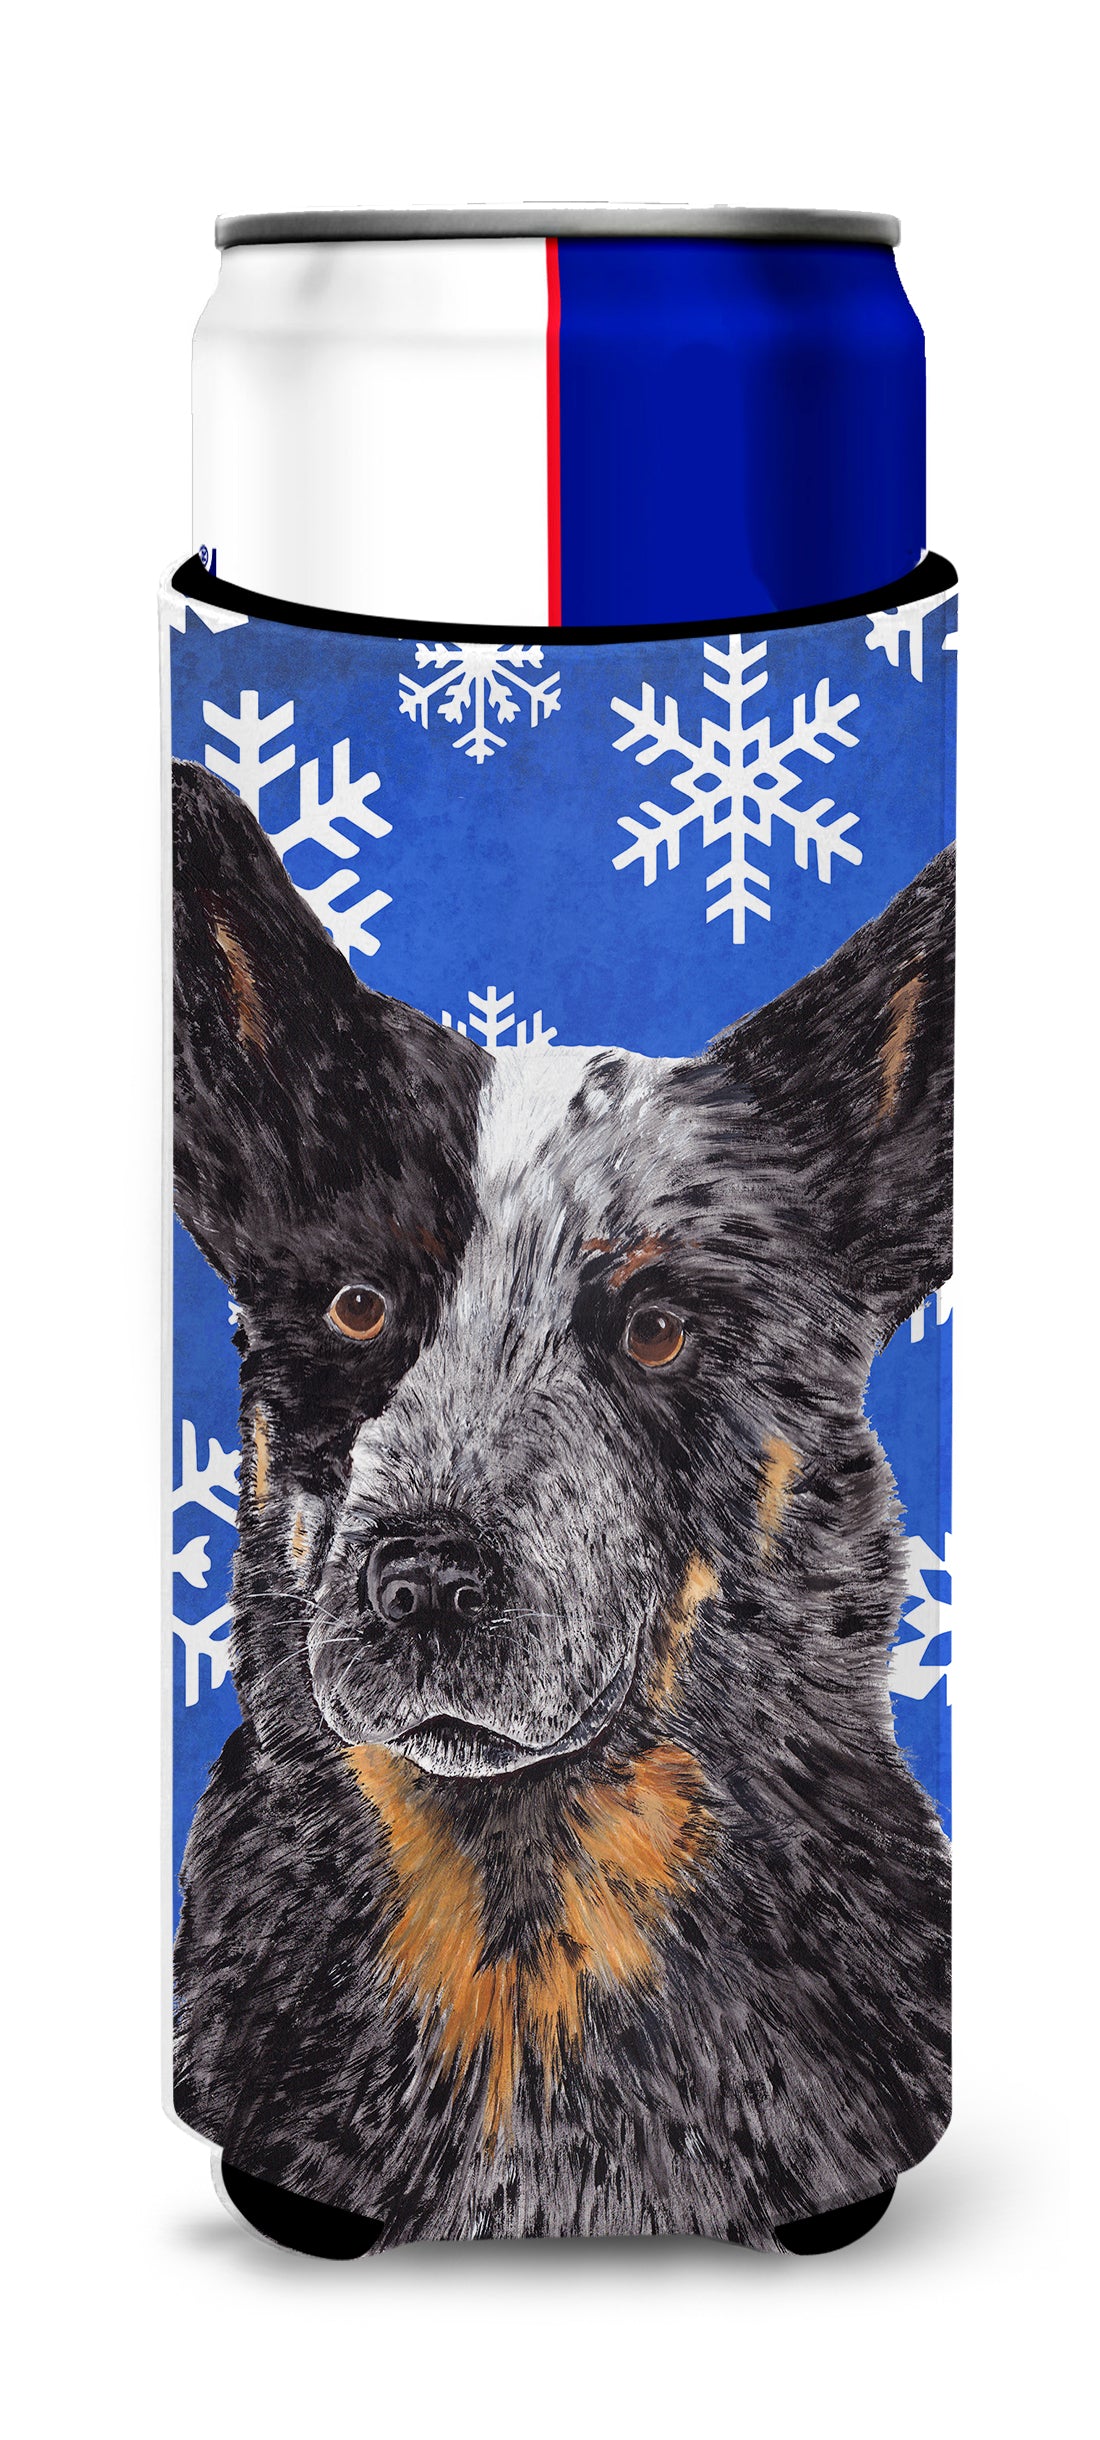 Australian Cattle Dog Winter Snowflakes Holiday Ultra Beverage Insulators for slim cans SC9396MUK.